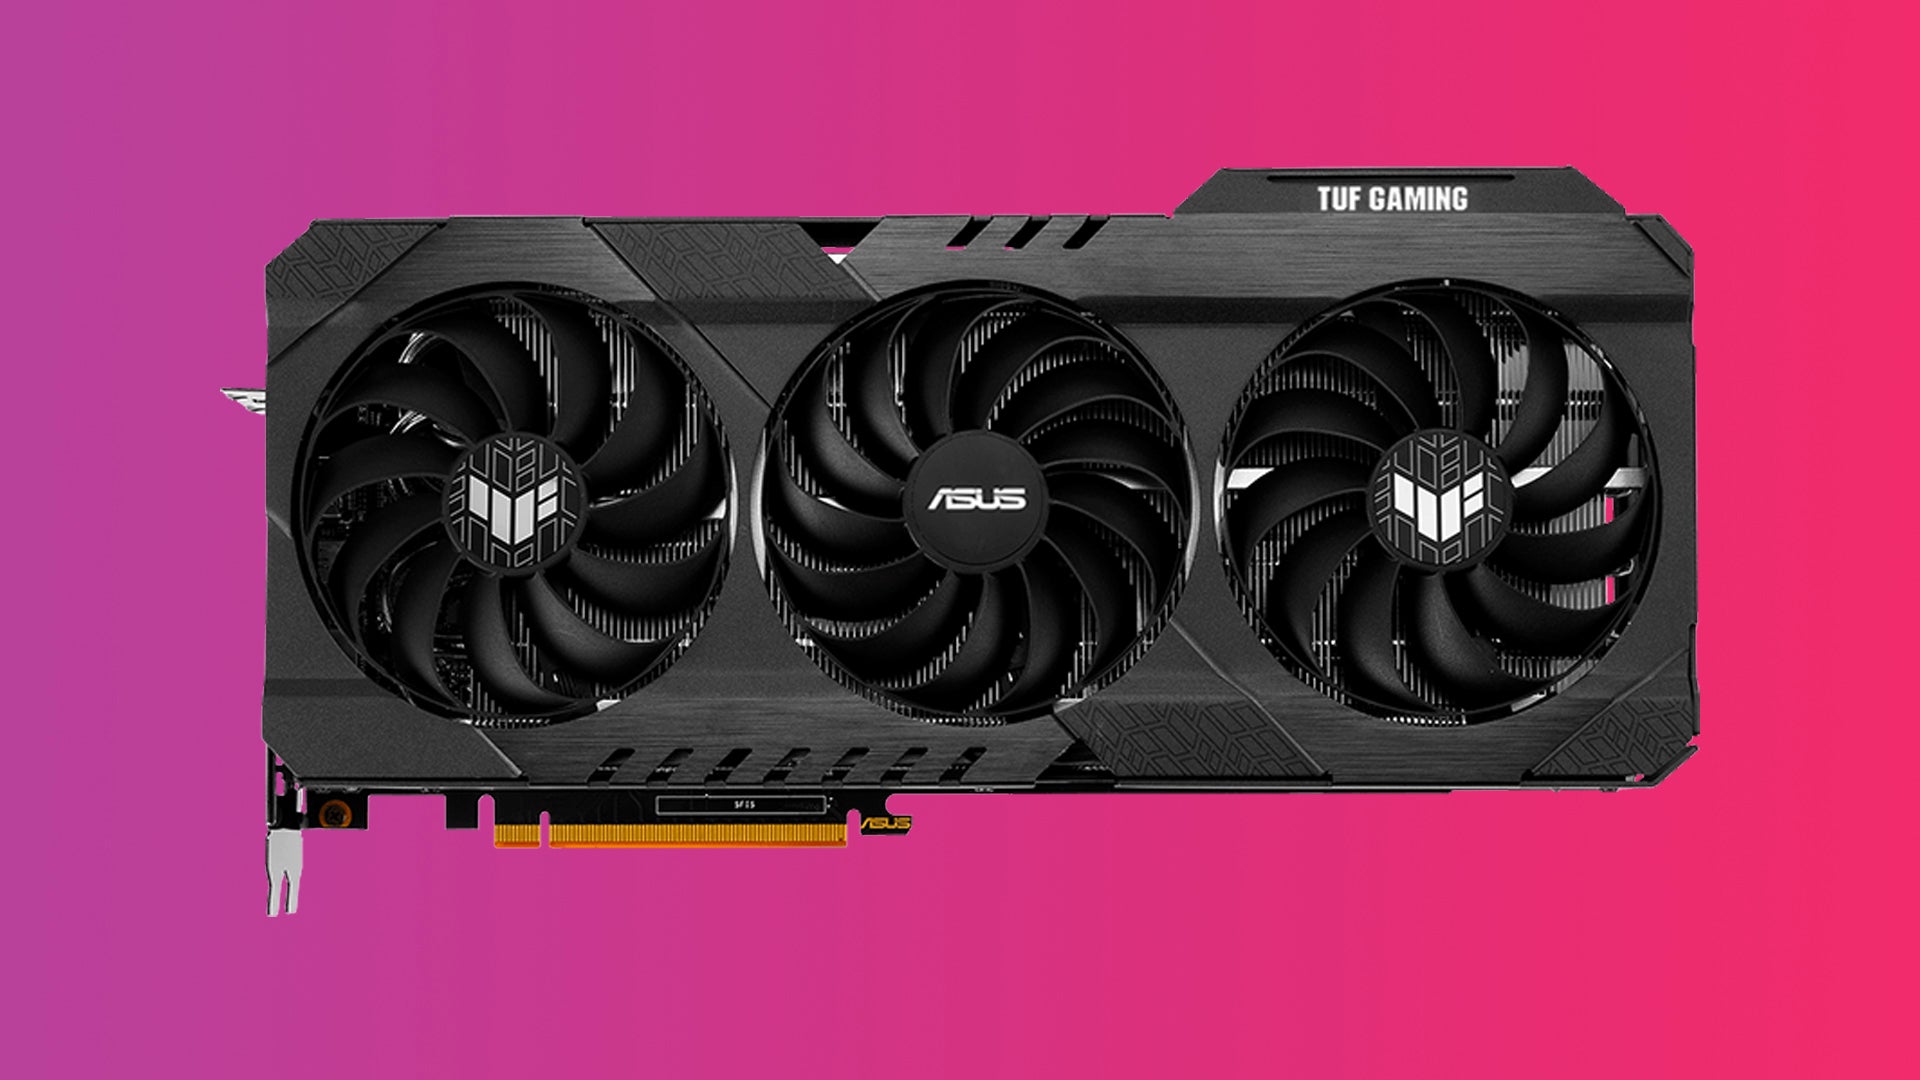 Grab this Asus Radeon RX 6800 XT TUF OC model for well under £600 